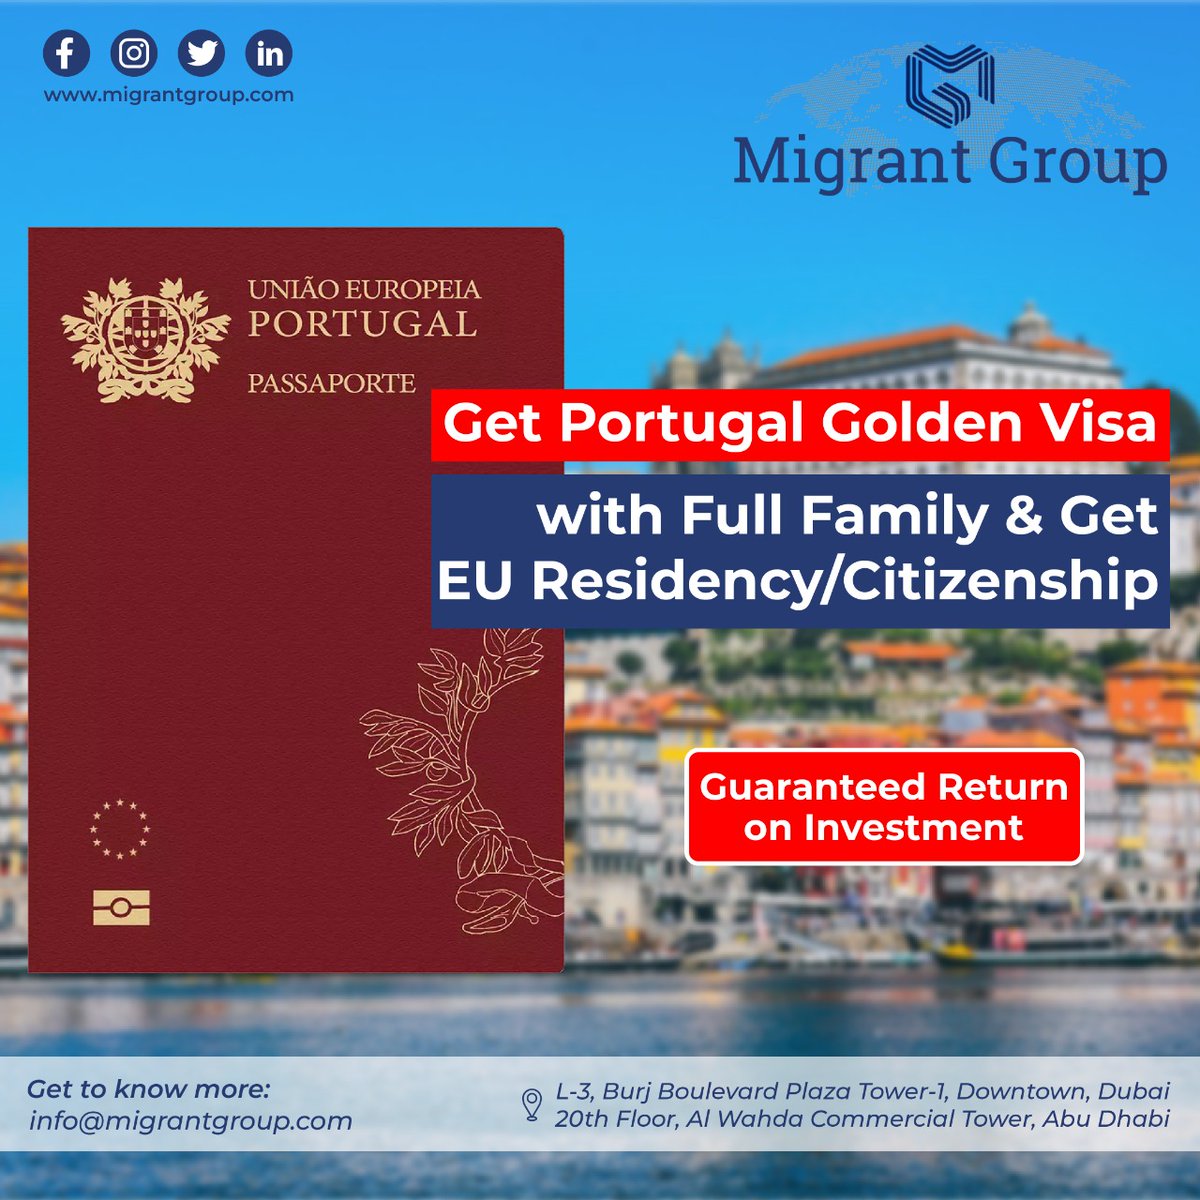 Portugal Golden Visa - Investments from EURO 280K.

Residency by Investment | Citizenship by Real Estate Investment | Second Passport | Travel free to all EU countries.

For more details - info@migrantgroup.com

#PortugalGoldenVisa #PortugalResidencyDubai #PortugalResidency